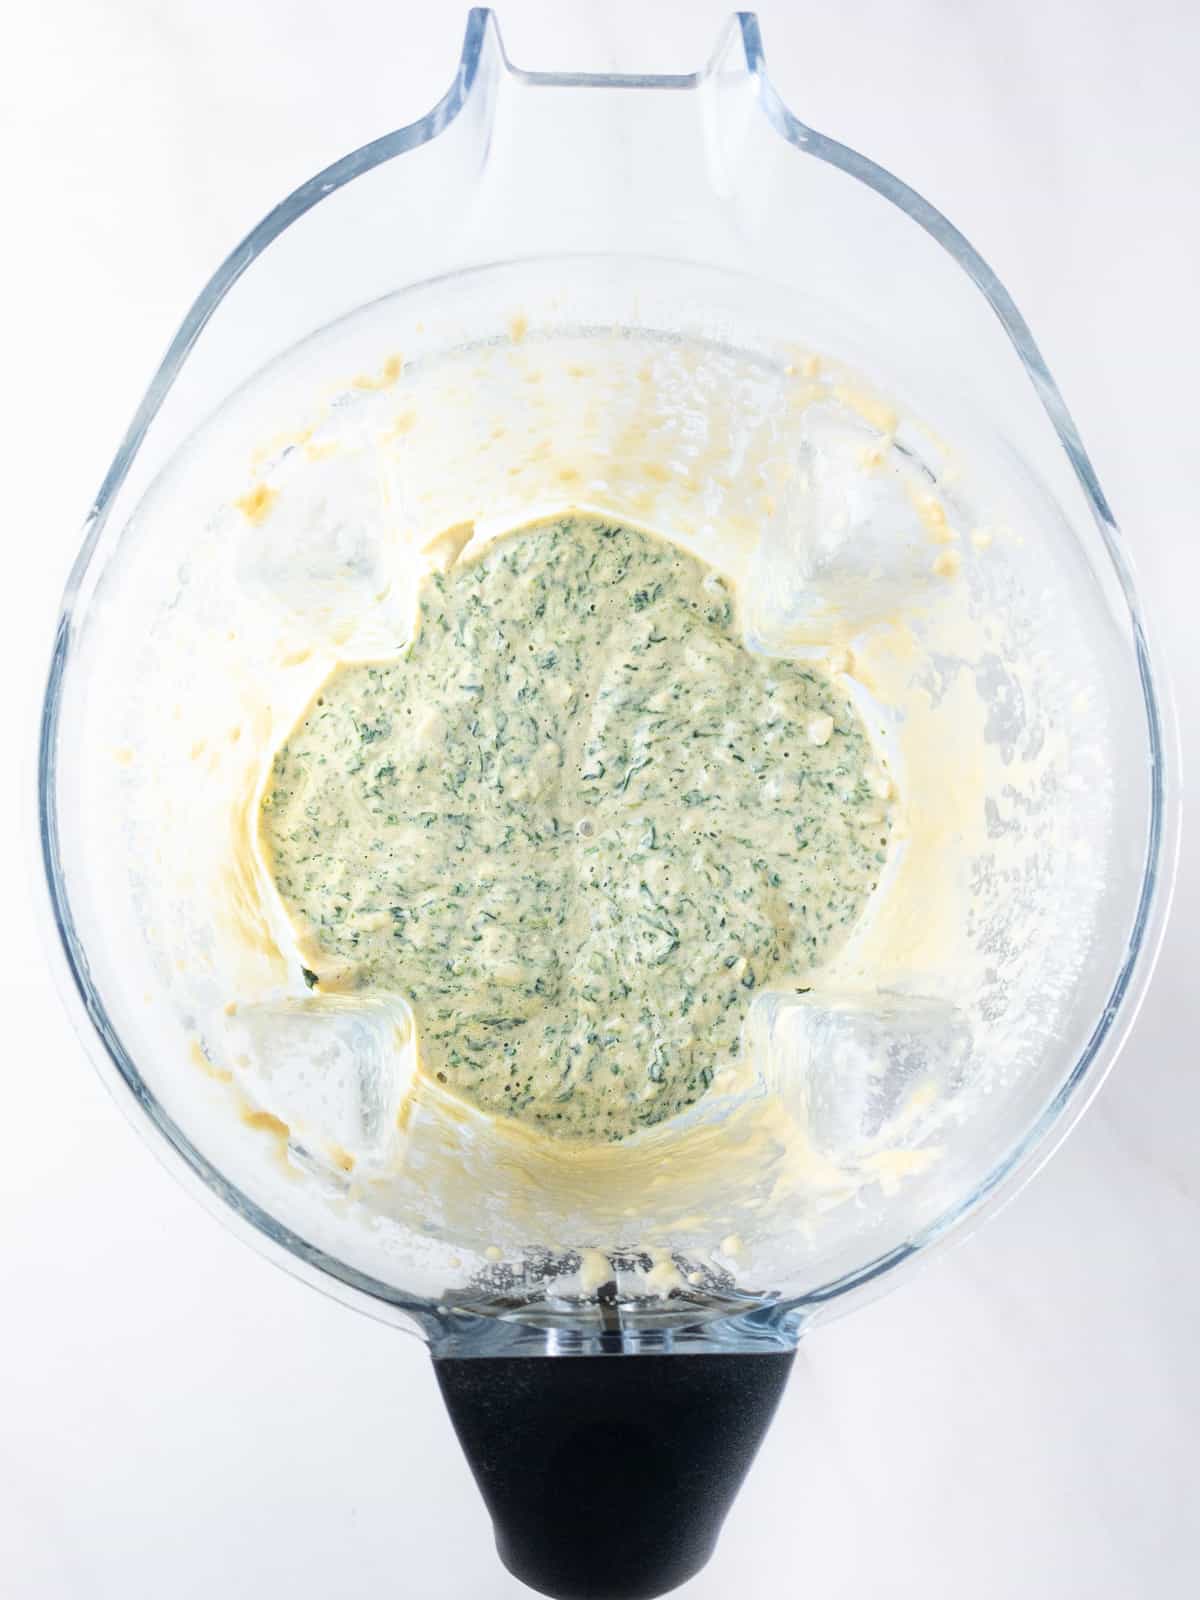 Dairy-free spinach artichoke dip mixed in a blender.